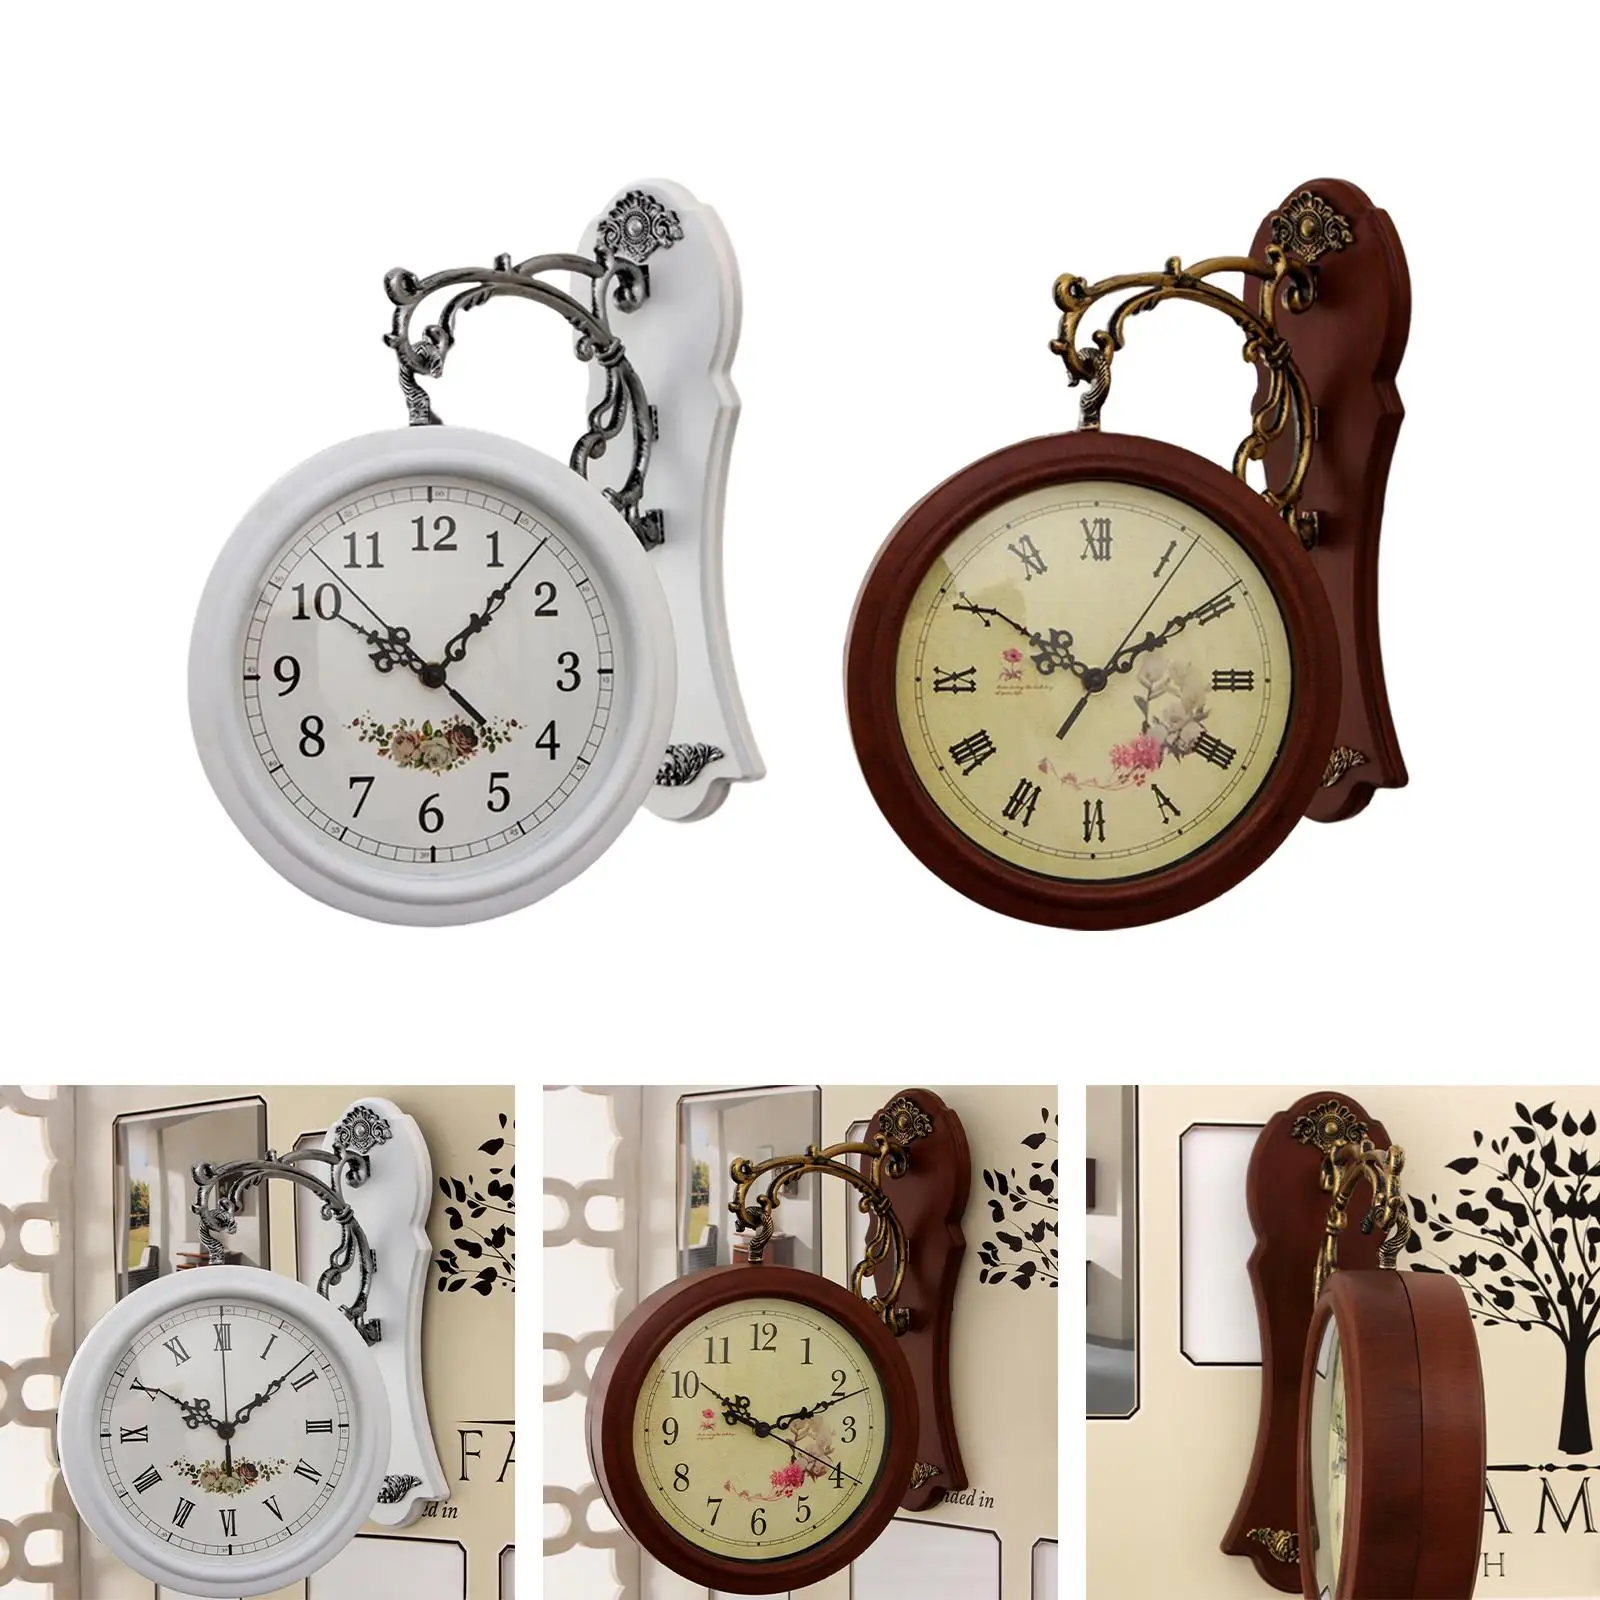 Double Sided Wall Clock Hanging Clocks Silent Farmhouse Art Clock Decorative Grand Central Station Clocks for Home Bedroom Study